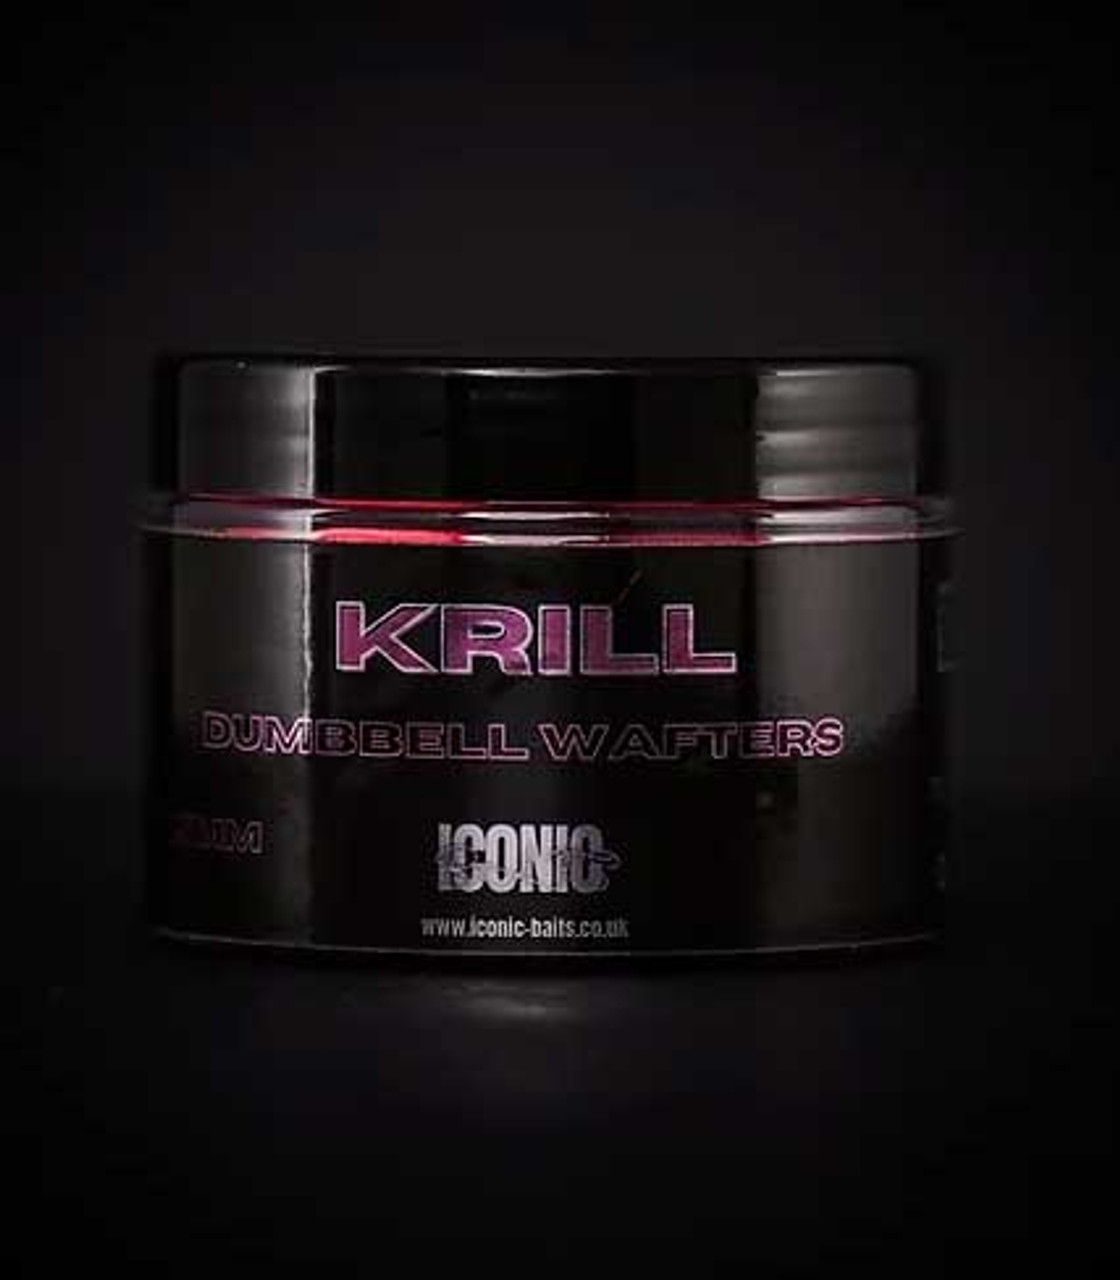  Iconic Baits Krill 15mm Wafters